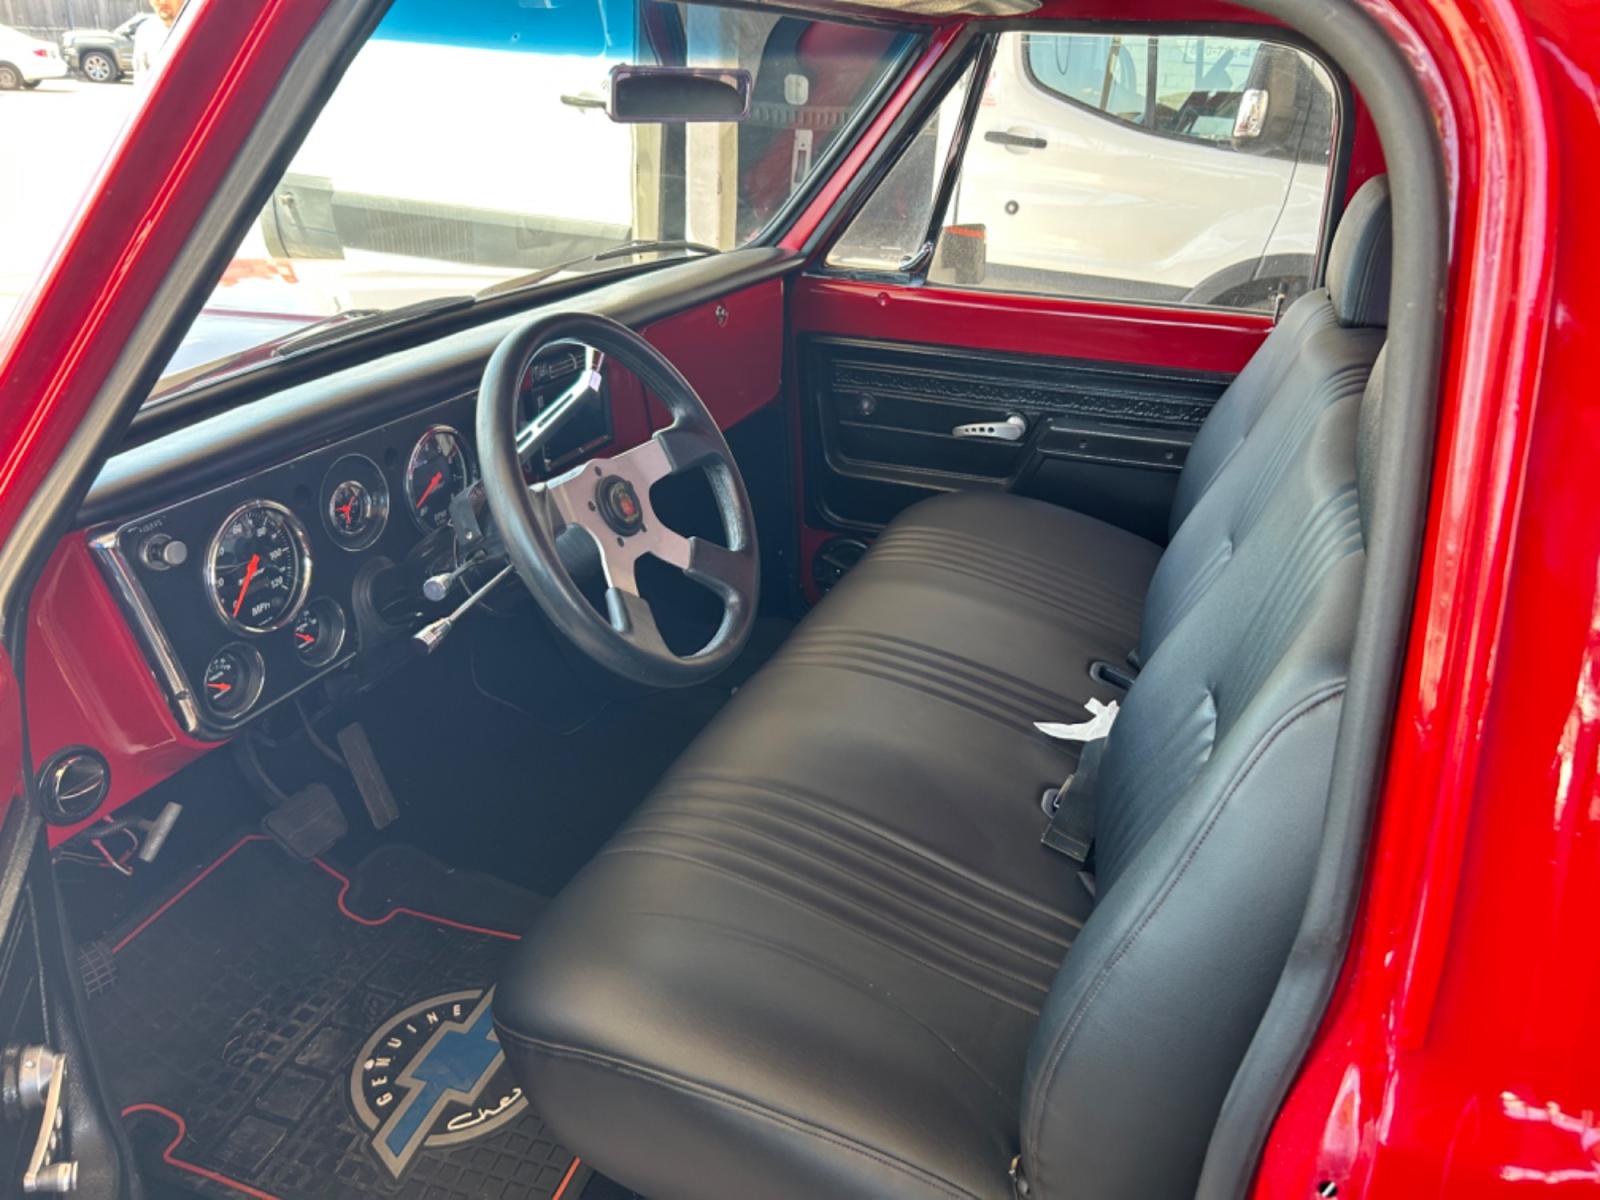 1972 Red Chevrolet C10 (CCE142A1201) , located at 1687 Business 35 S, New Braunfels, TX, 78130, (830) 625-7159, 29.655487, -98.051491 - Photo #7